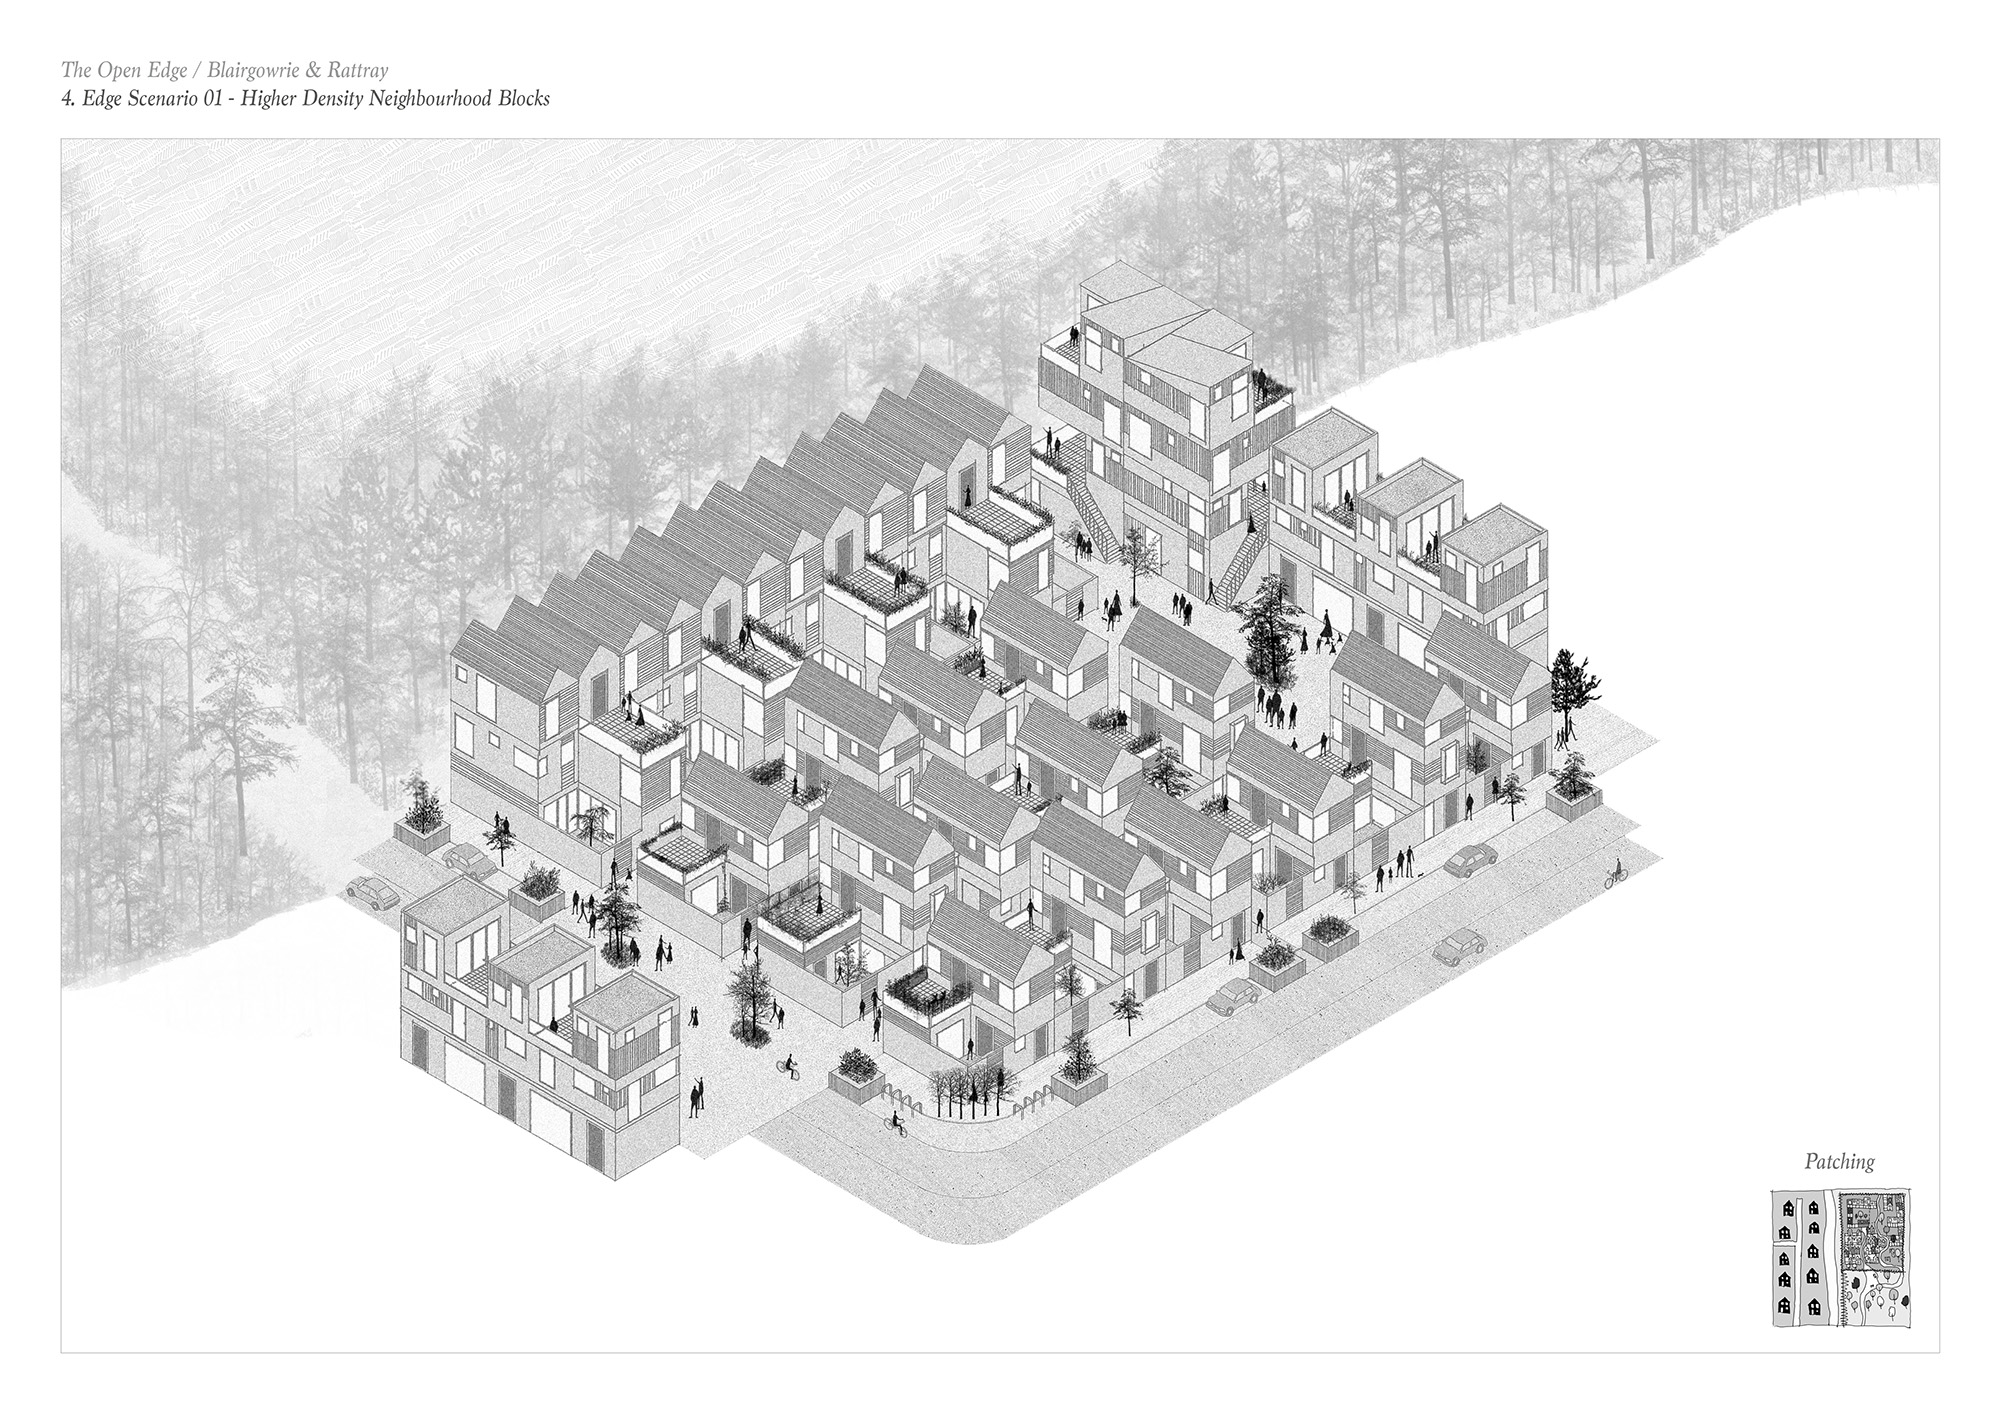 Page 4 of Sam Morman winning entry to the A&DS and RIAS Scottish Student Awards. The concept board includes architectural drawings of a high-density neighbourhood block nearby a forest. 